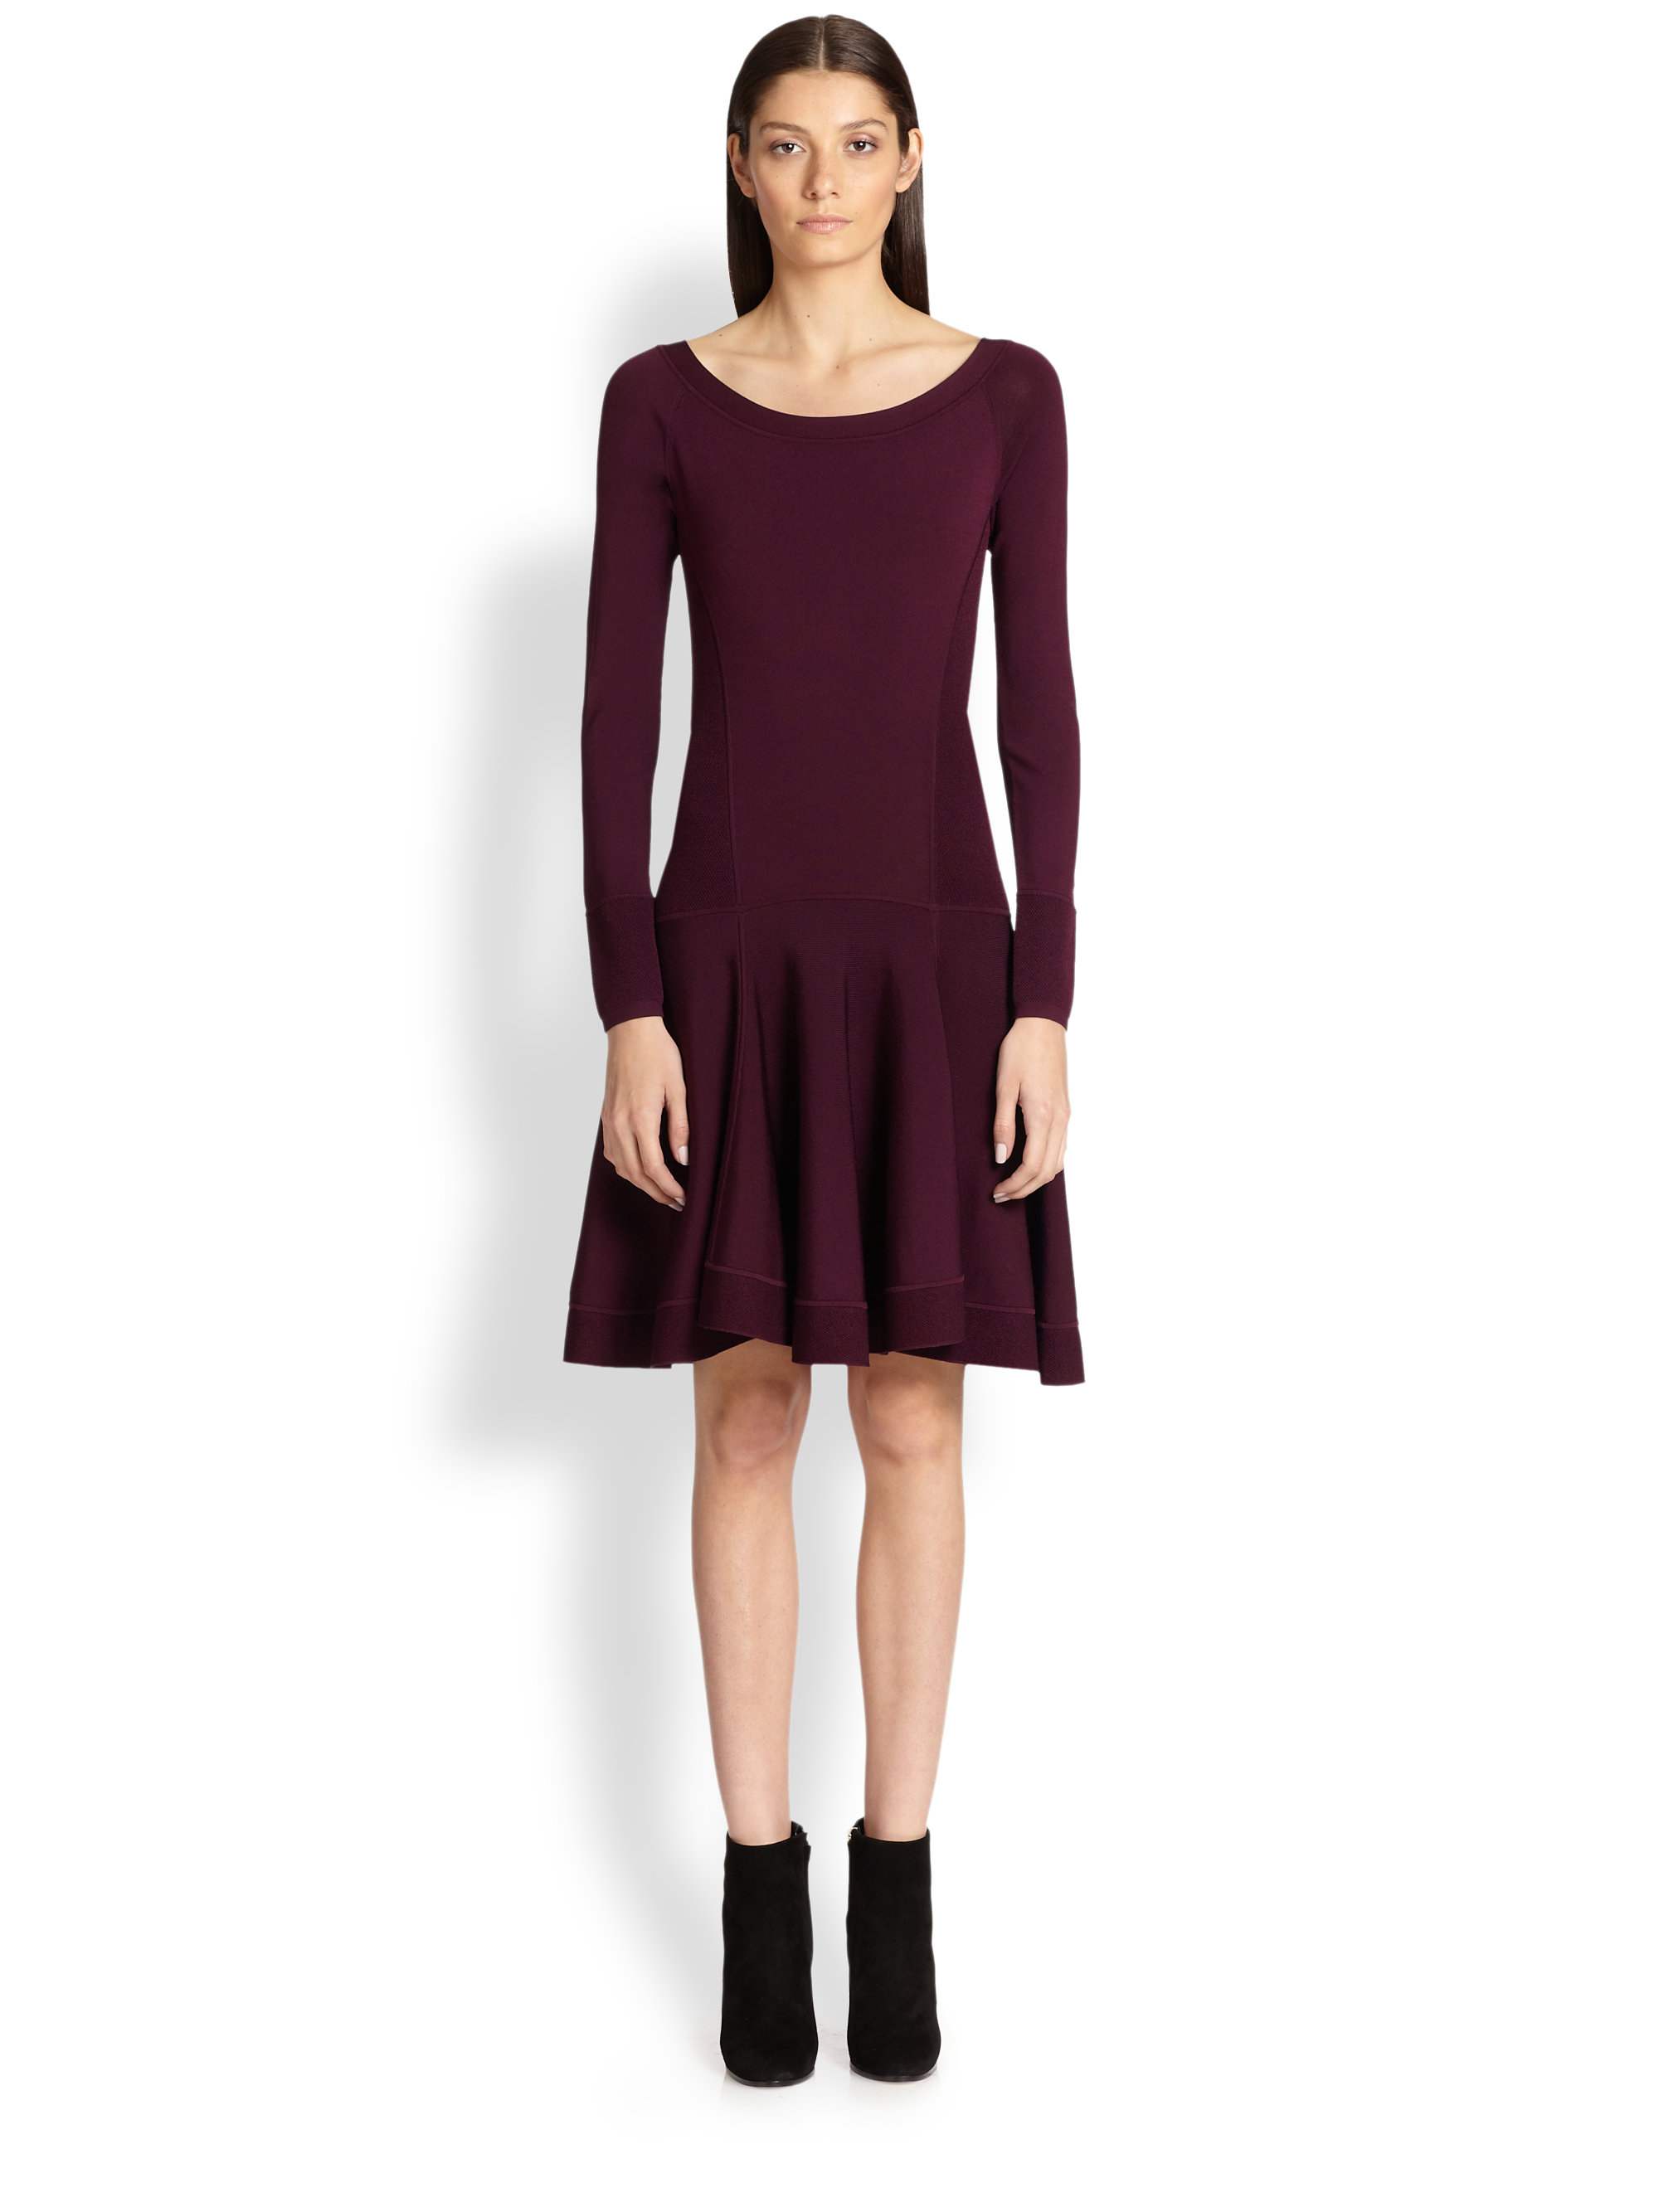 Lyst - Donna Karan Long-sleeve Fit-&-flare Dress in Red